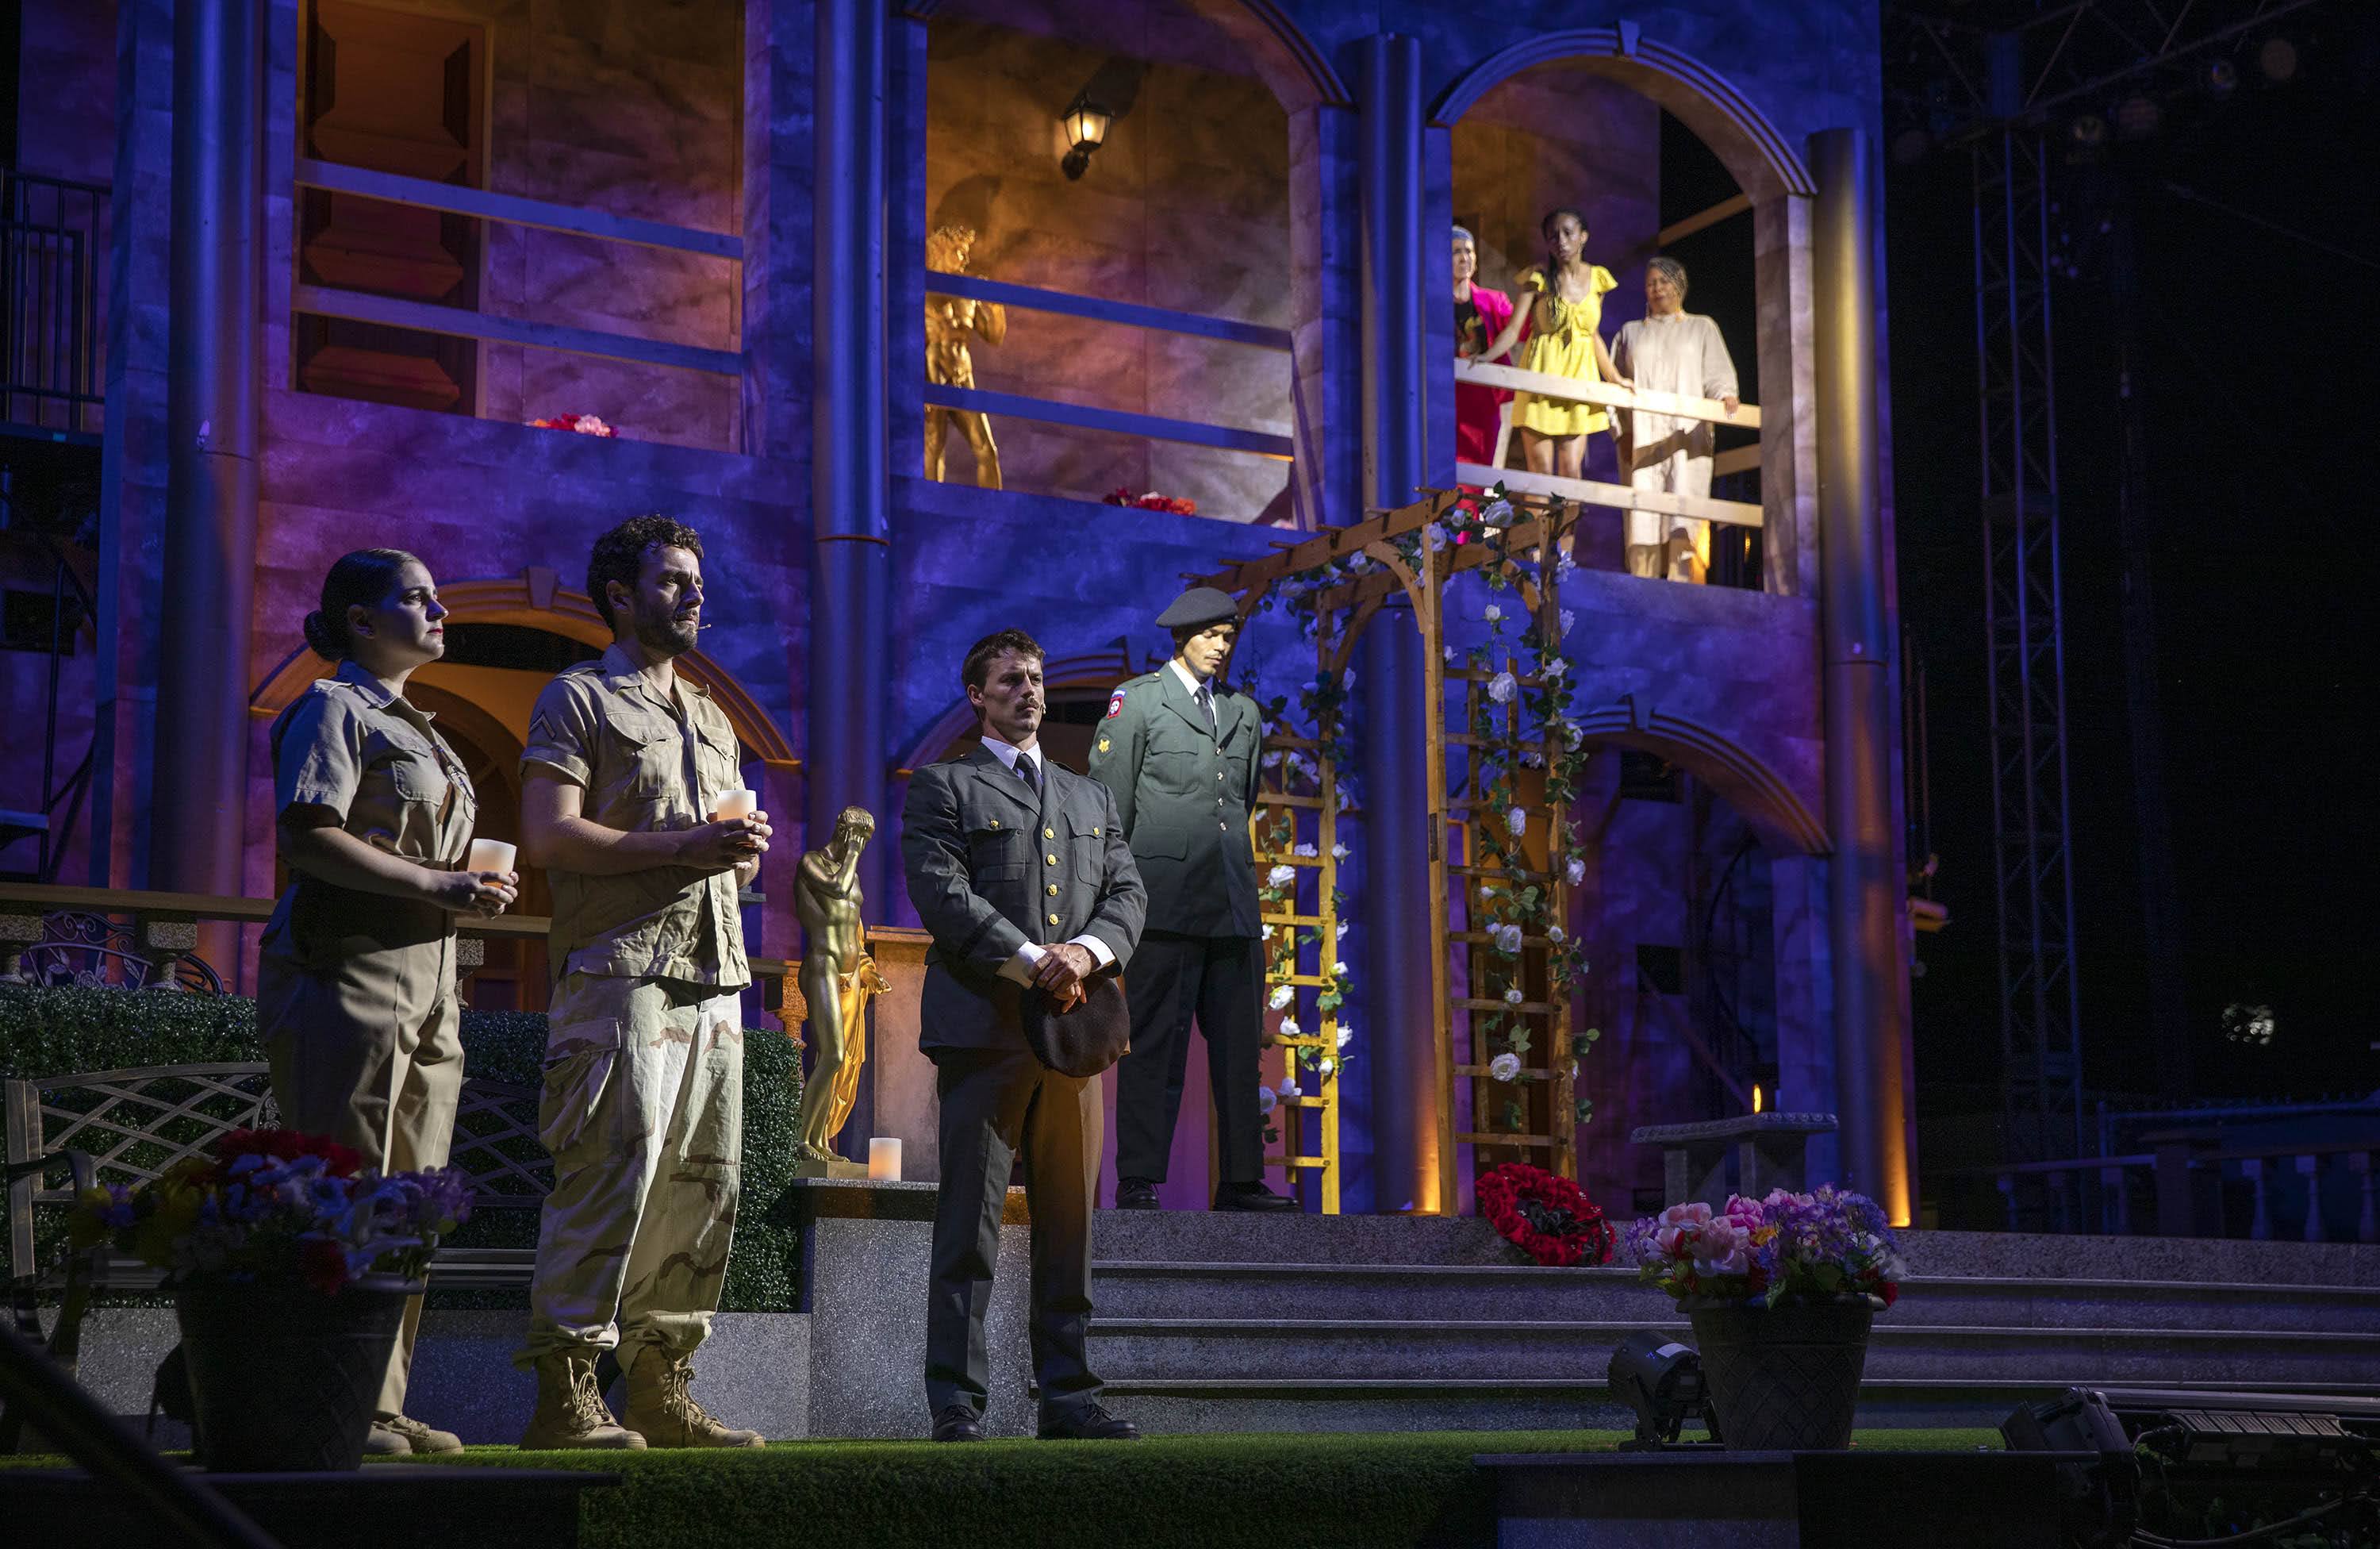 Don Pedro, Claudio and others pay their respects to Hero, who they believe has died, in a scene during rehearsal for the Commonwealth Shakespeare Company's &quot;Much Ado About Nothing&quot; on Boston Common. (Robin Lubbock/WBUR)